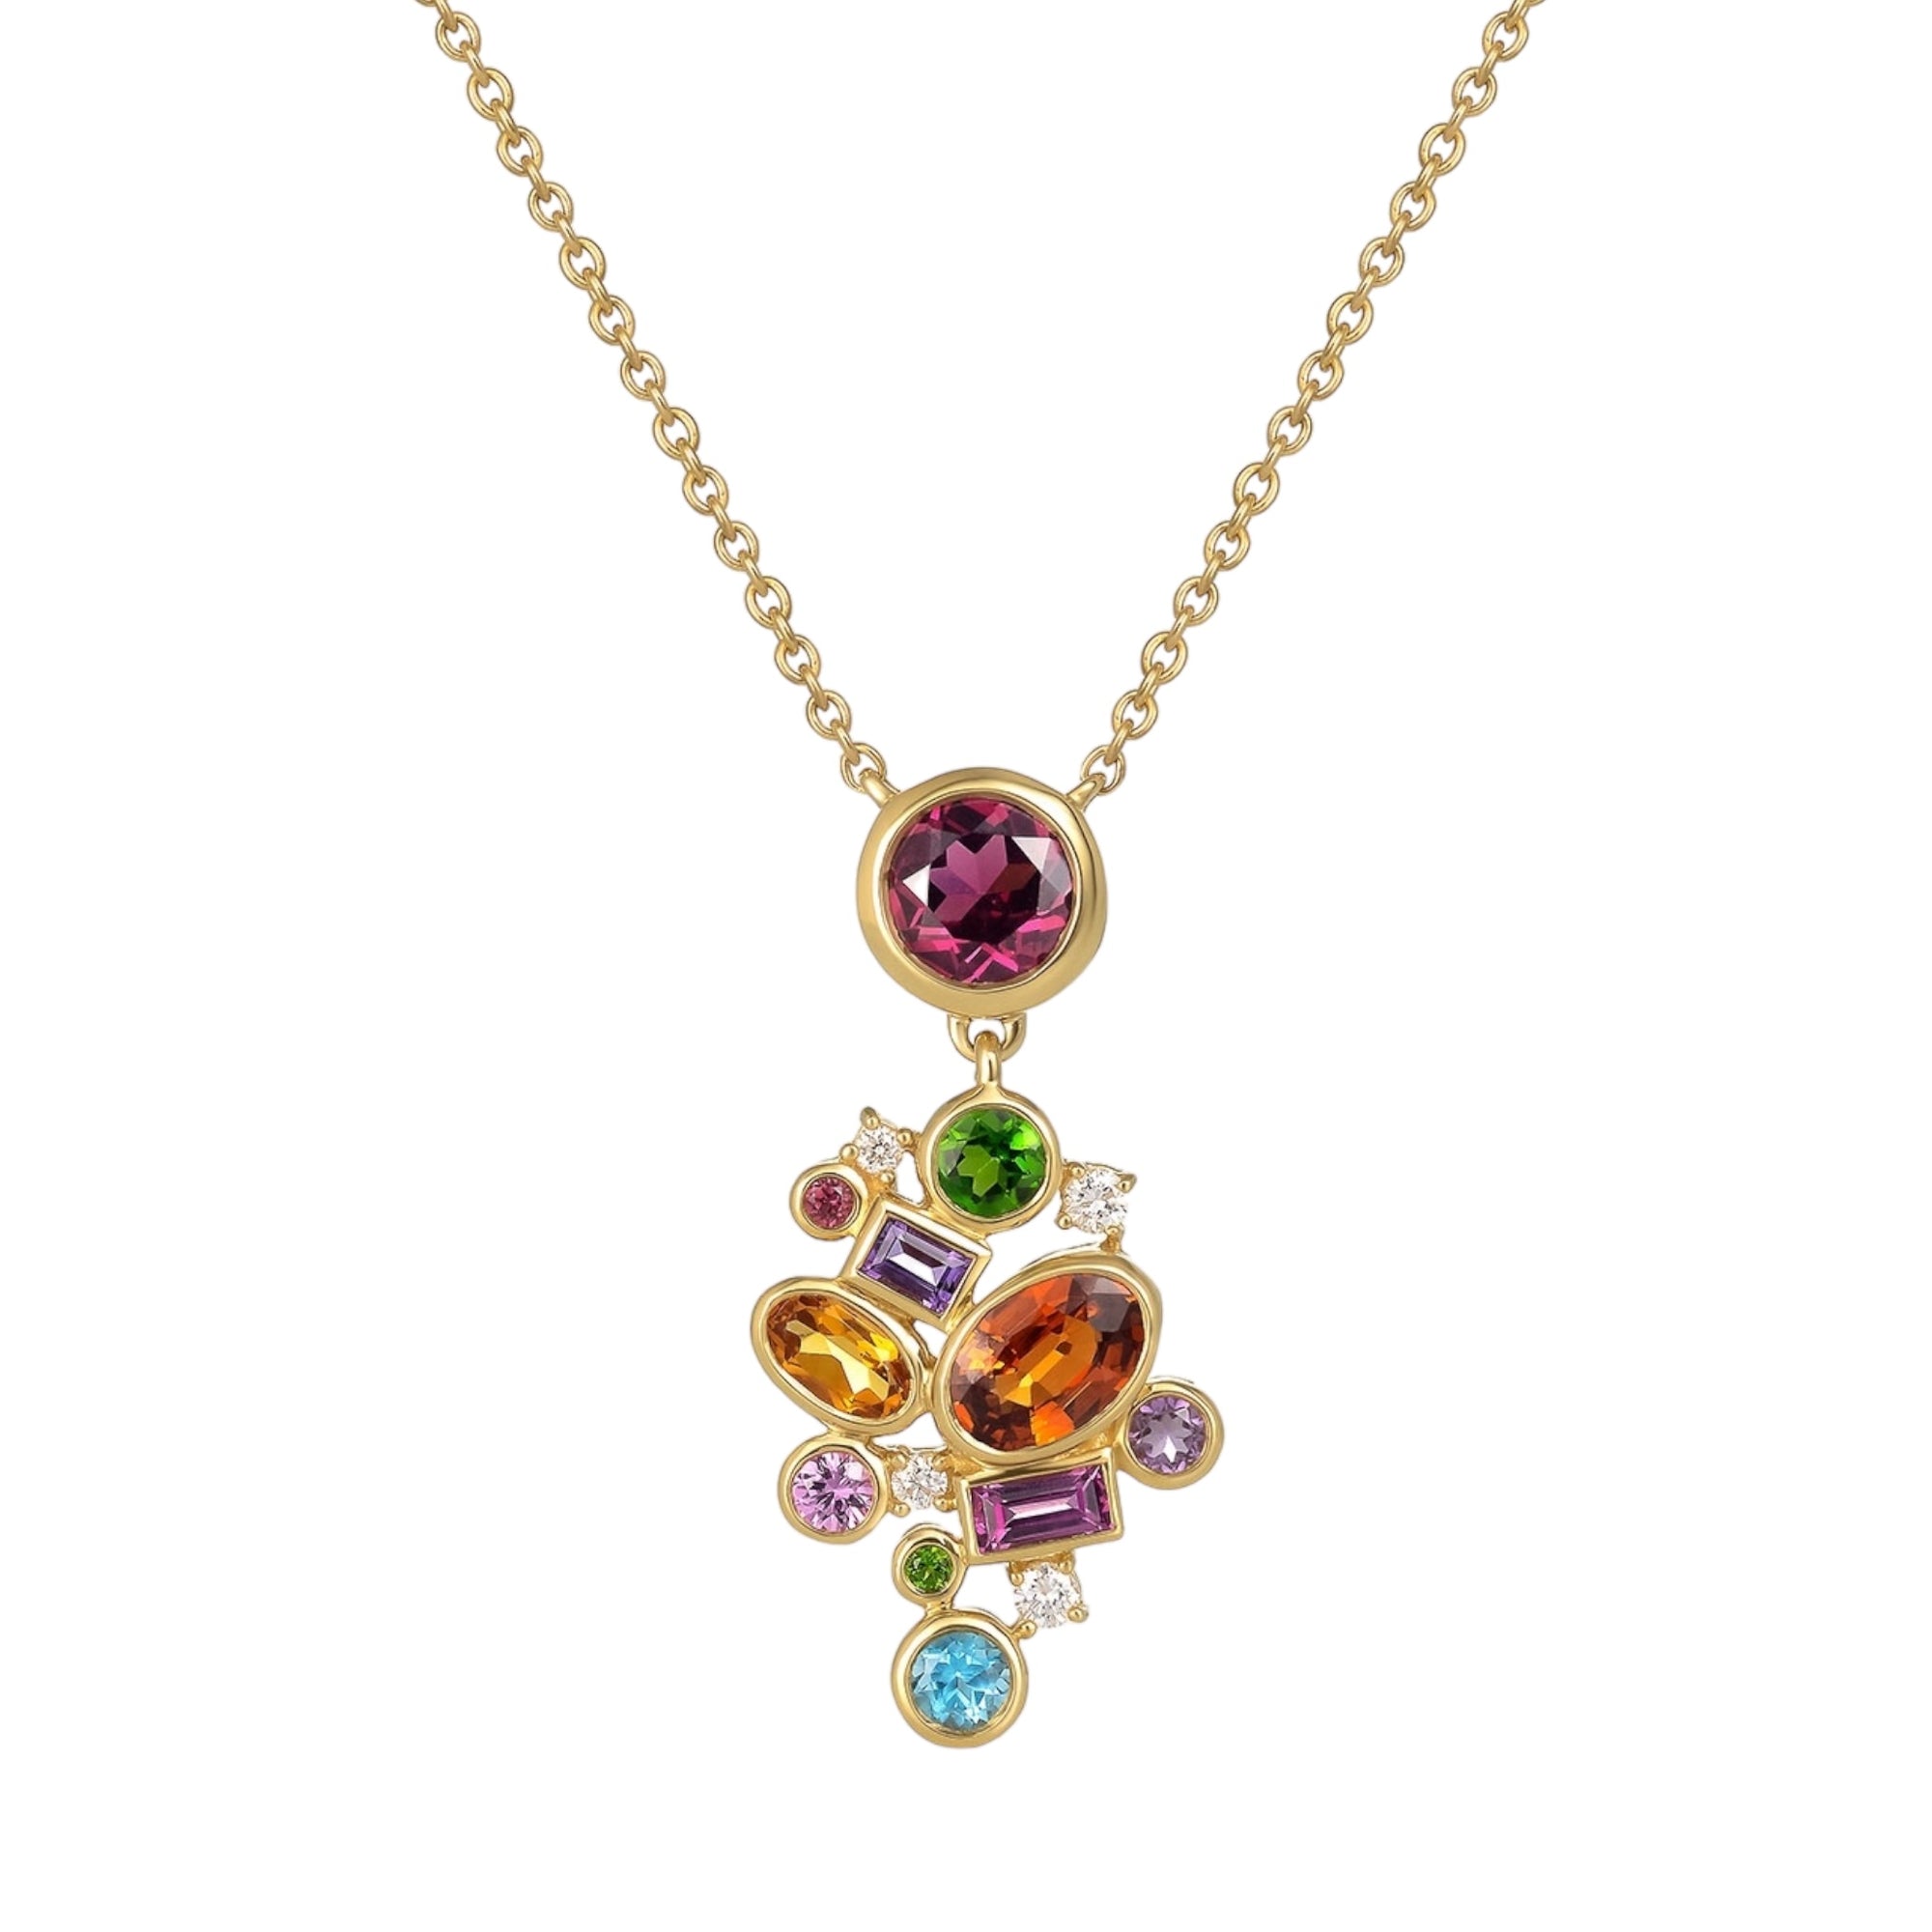 Supernova Necklace 14k by Martha Seely available at Talisman Collection Fine Jewelers in El Dorado Hills, CA and online. Stats: A colorful pendant comprised of 0.098 cts sparkling diamonds and 2.82 cts of multi-color gemstones (rhodolite, chrome diopside, pink sapphire, Swiss blue topaz, amethyst, spessartite and citrine) designed to make your day feel like an explosion of joy! The vibrant 14k pendant measures 1.18” L x 0.6” W and hangs from an 18" chain.